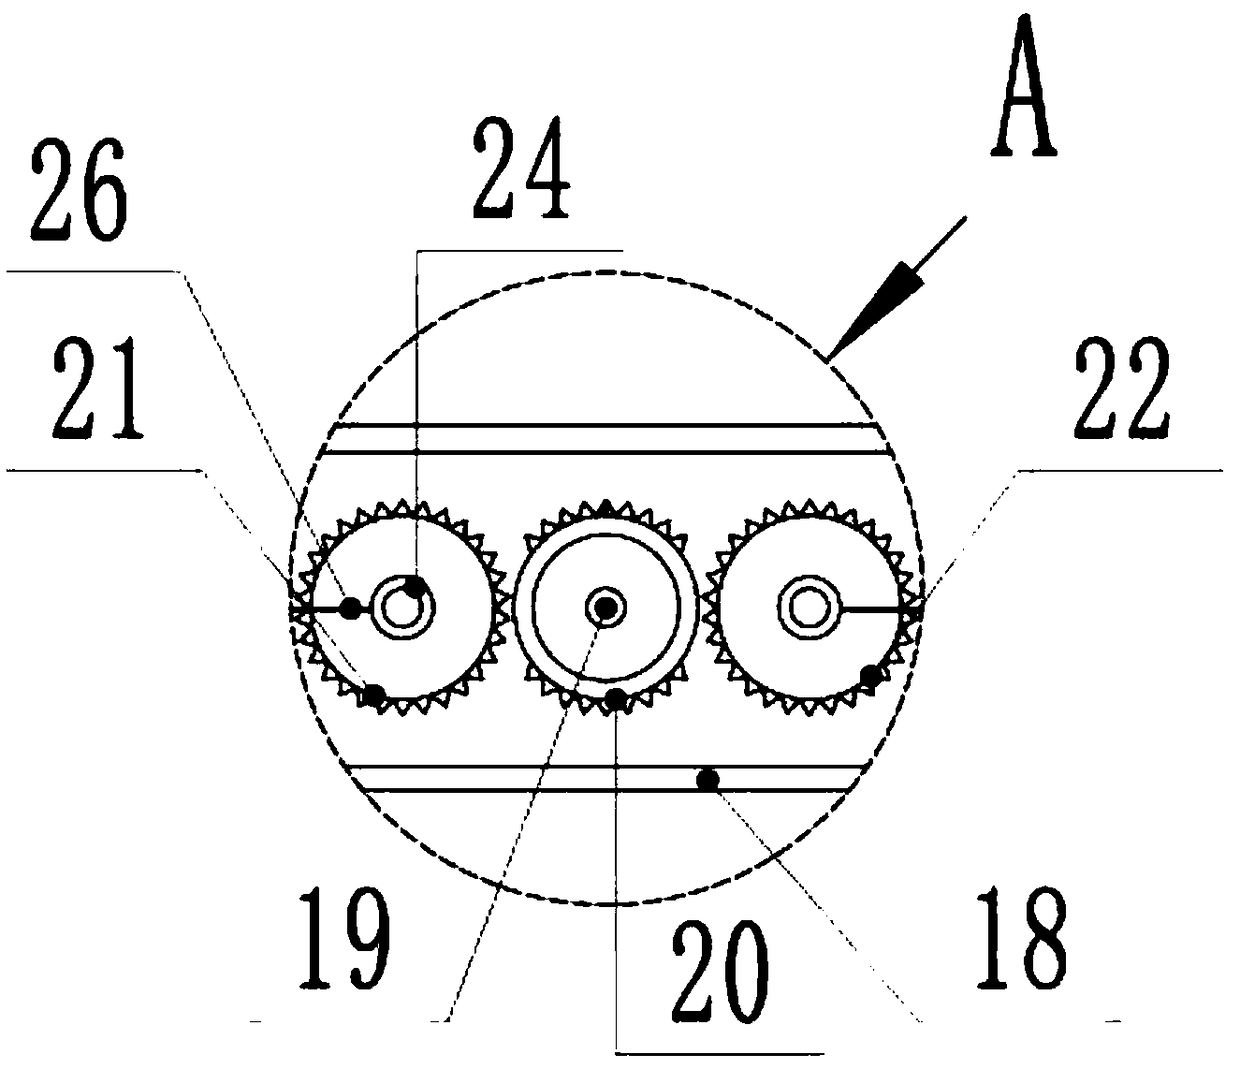 Ceramic material grinding and screening device for three-dimensional (3D) printing